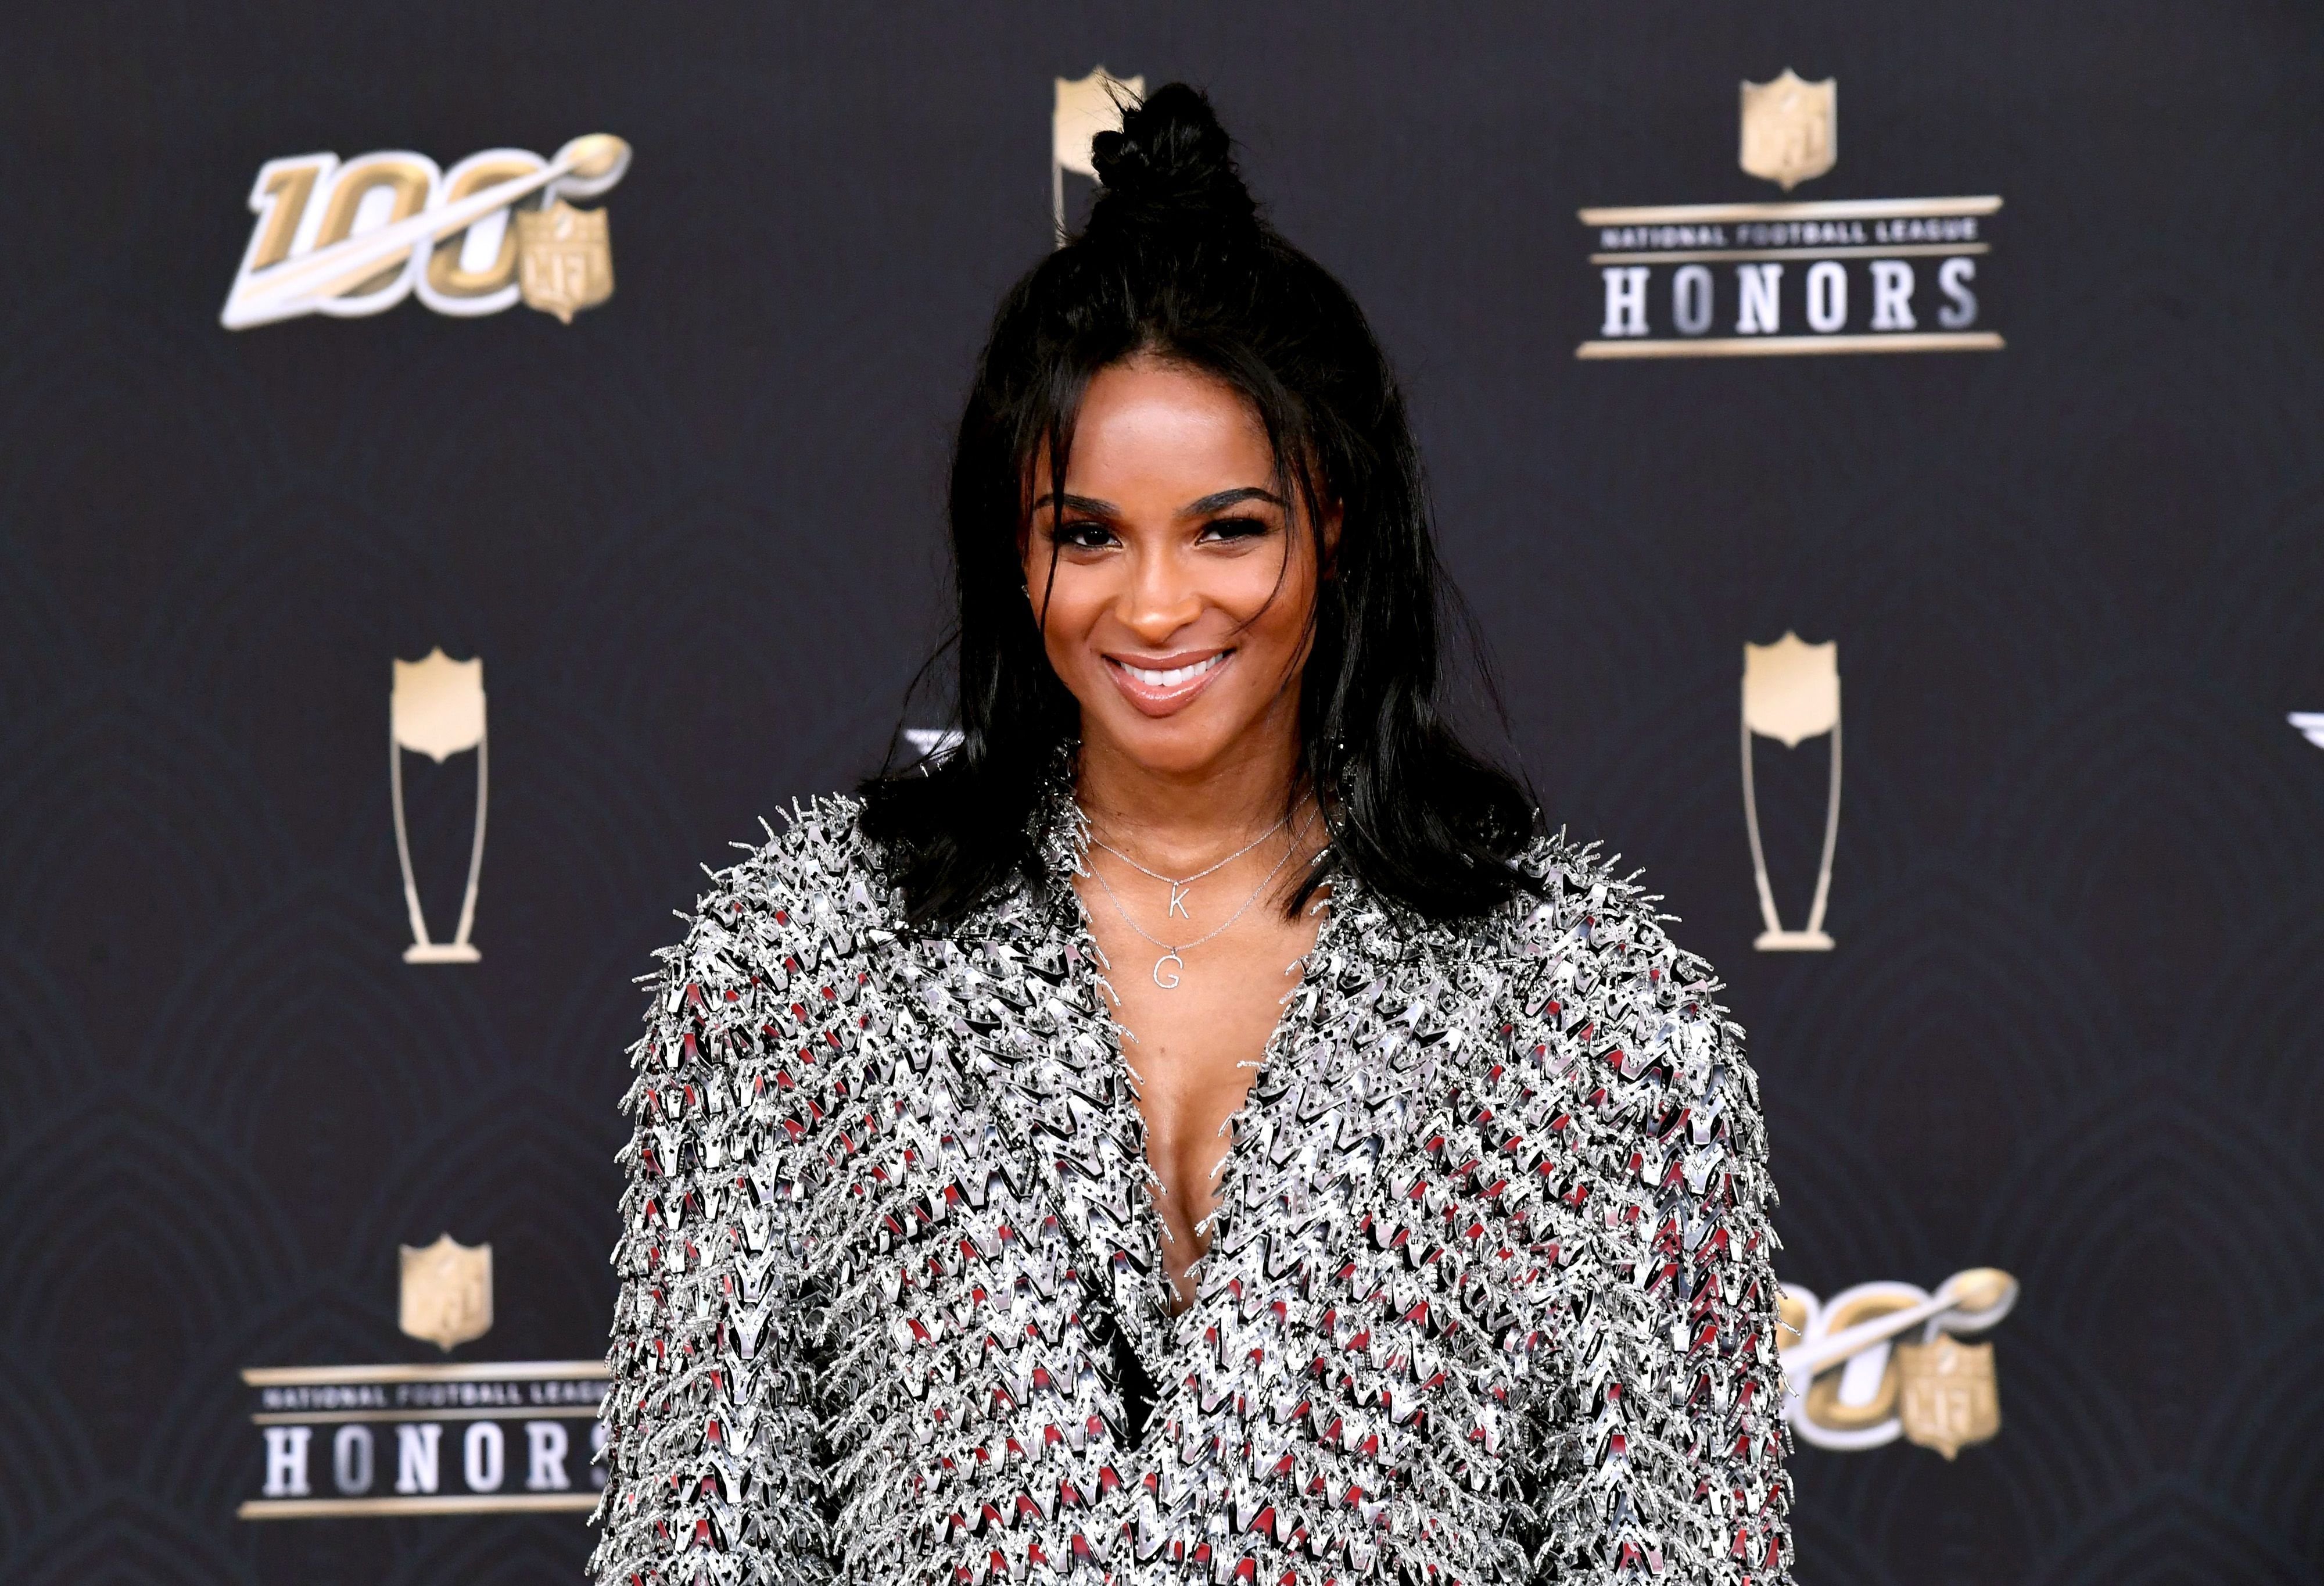 Ciara during the 9th Annual NFL Honors at Adrienne Arsht Center on February 01, 2020 in Miami, Florida. | Source: Getty Images